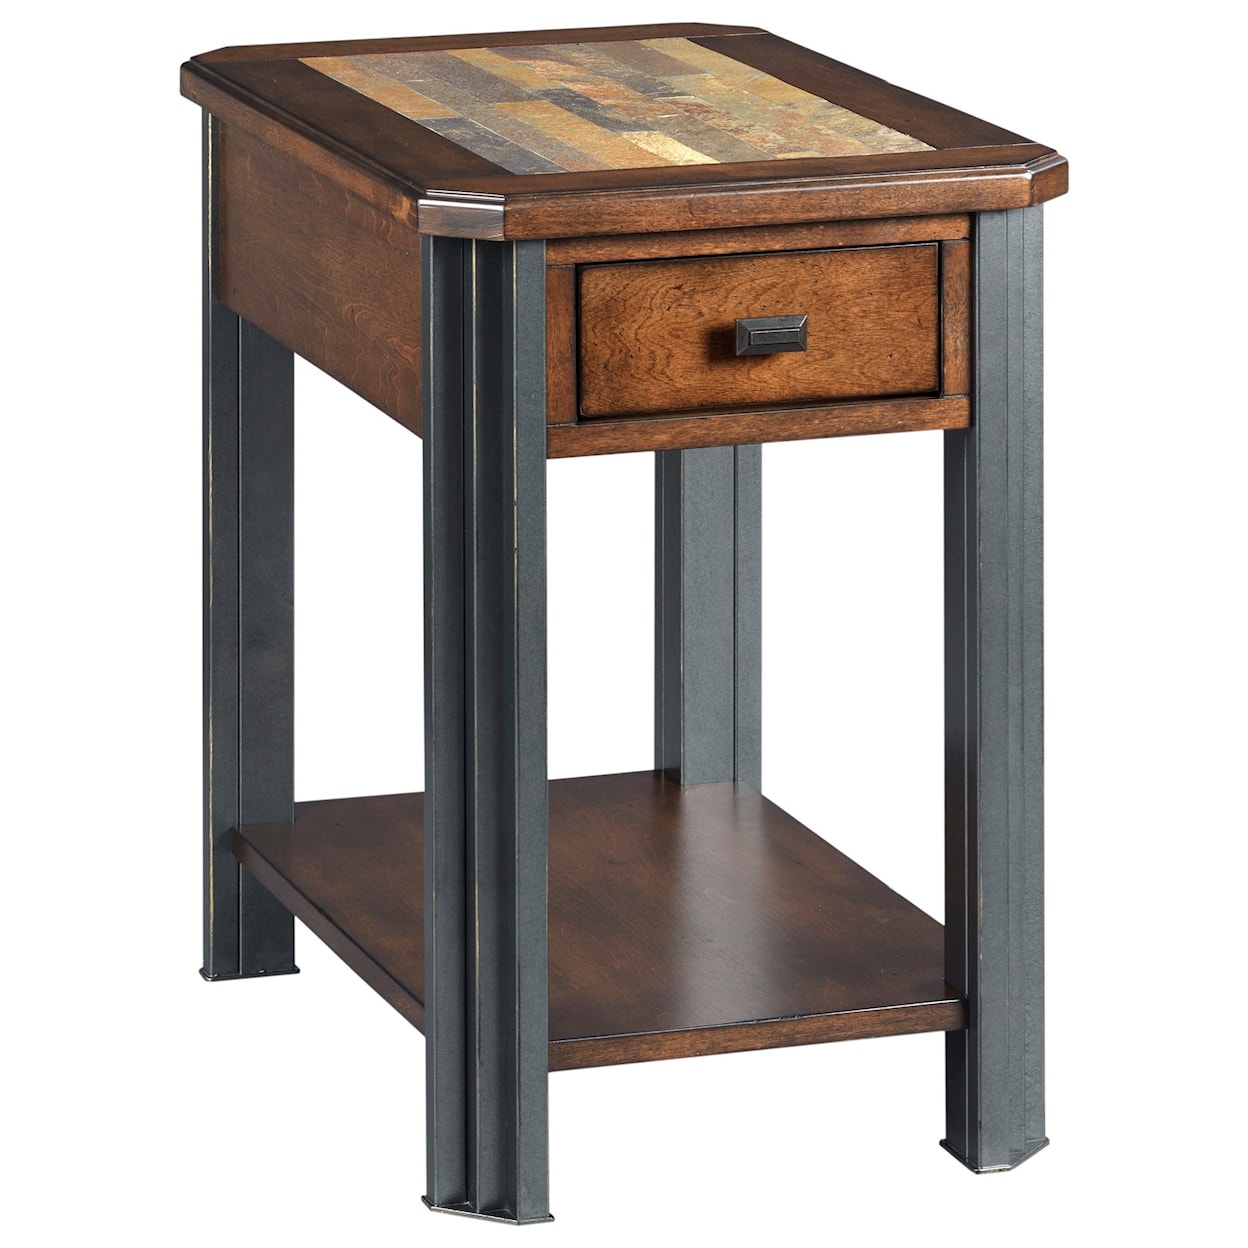 Hammary Reverie Chairside Table